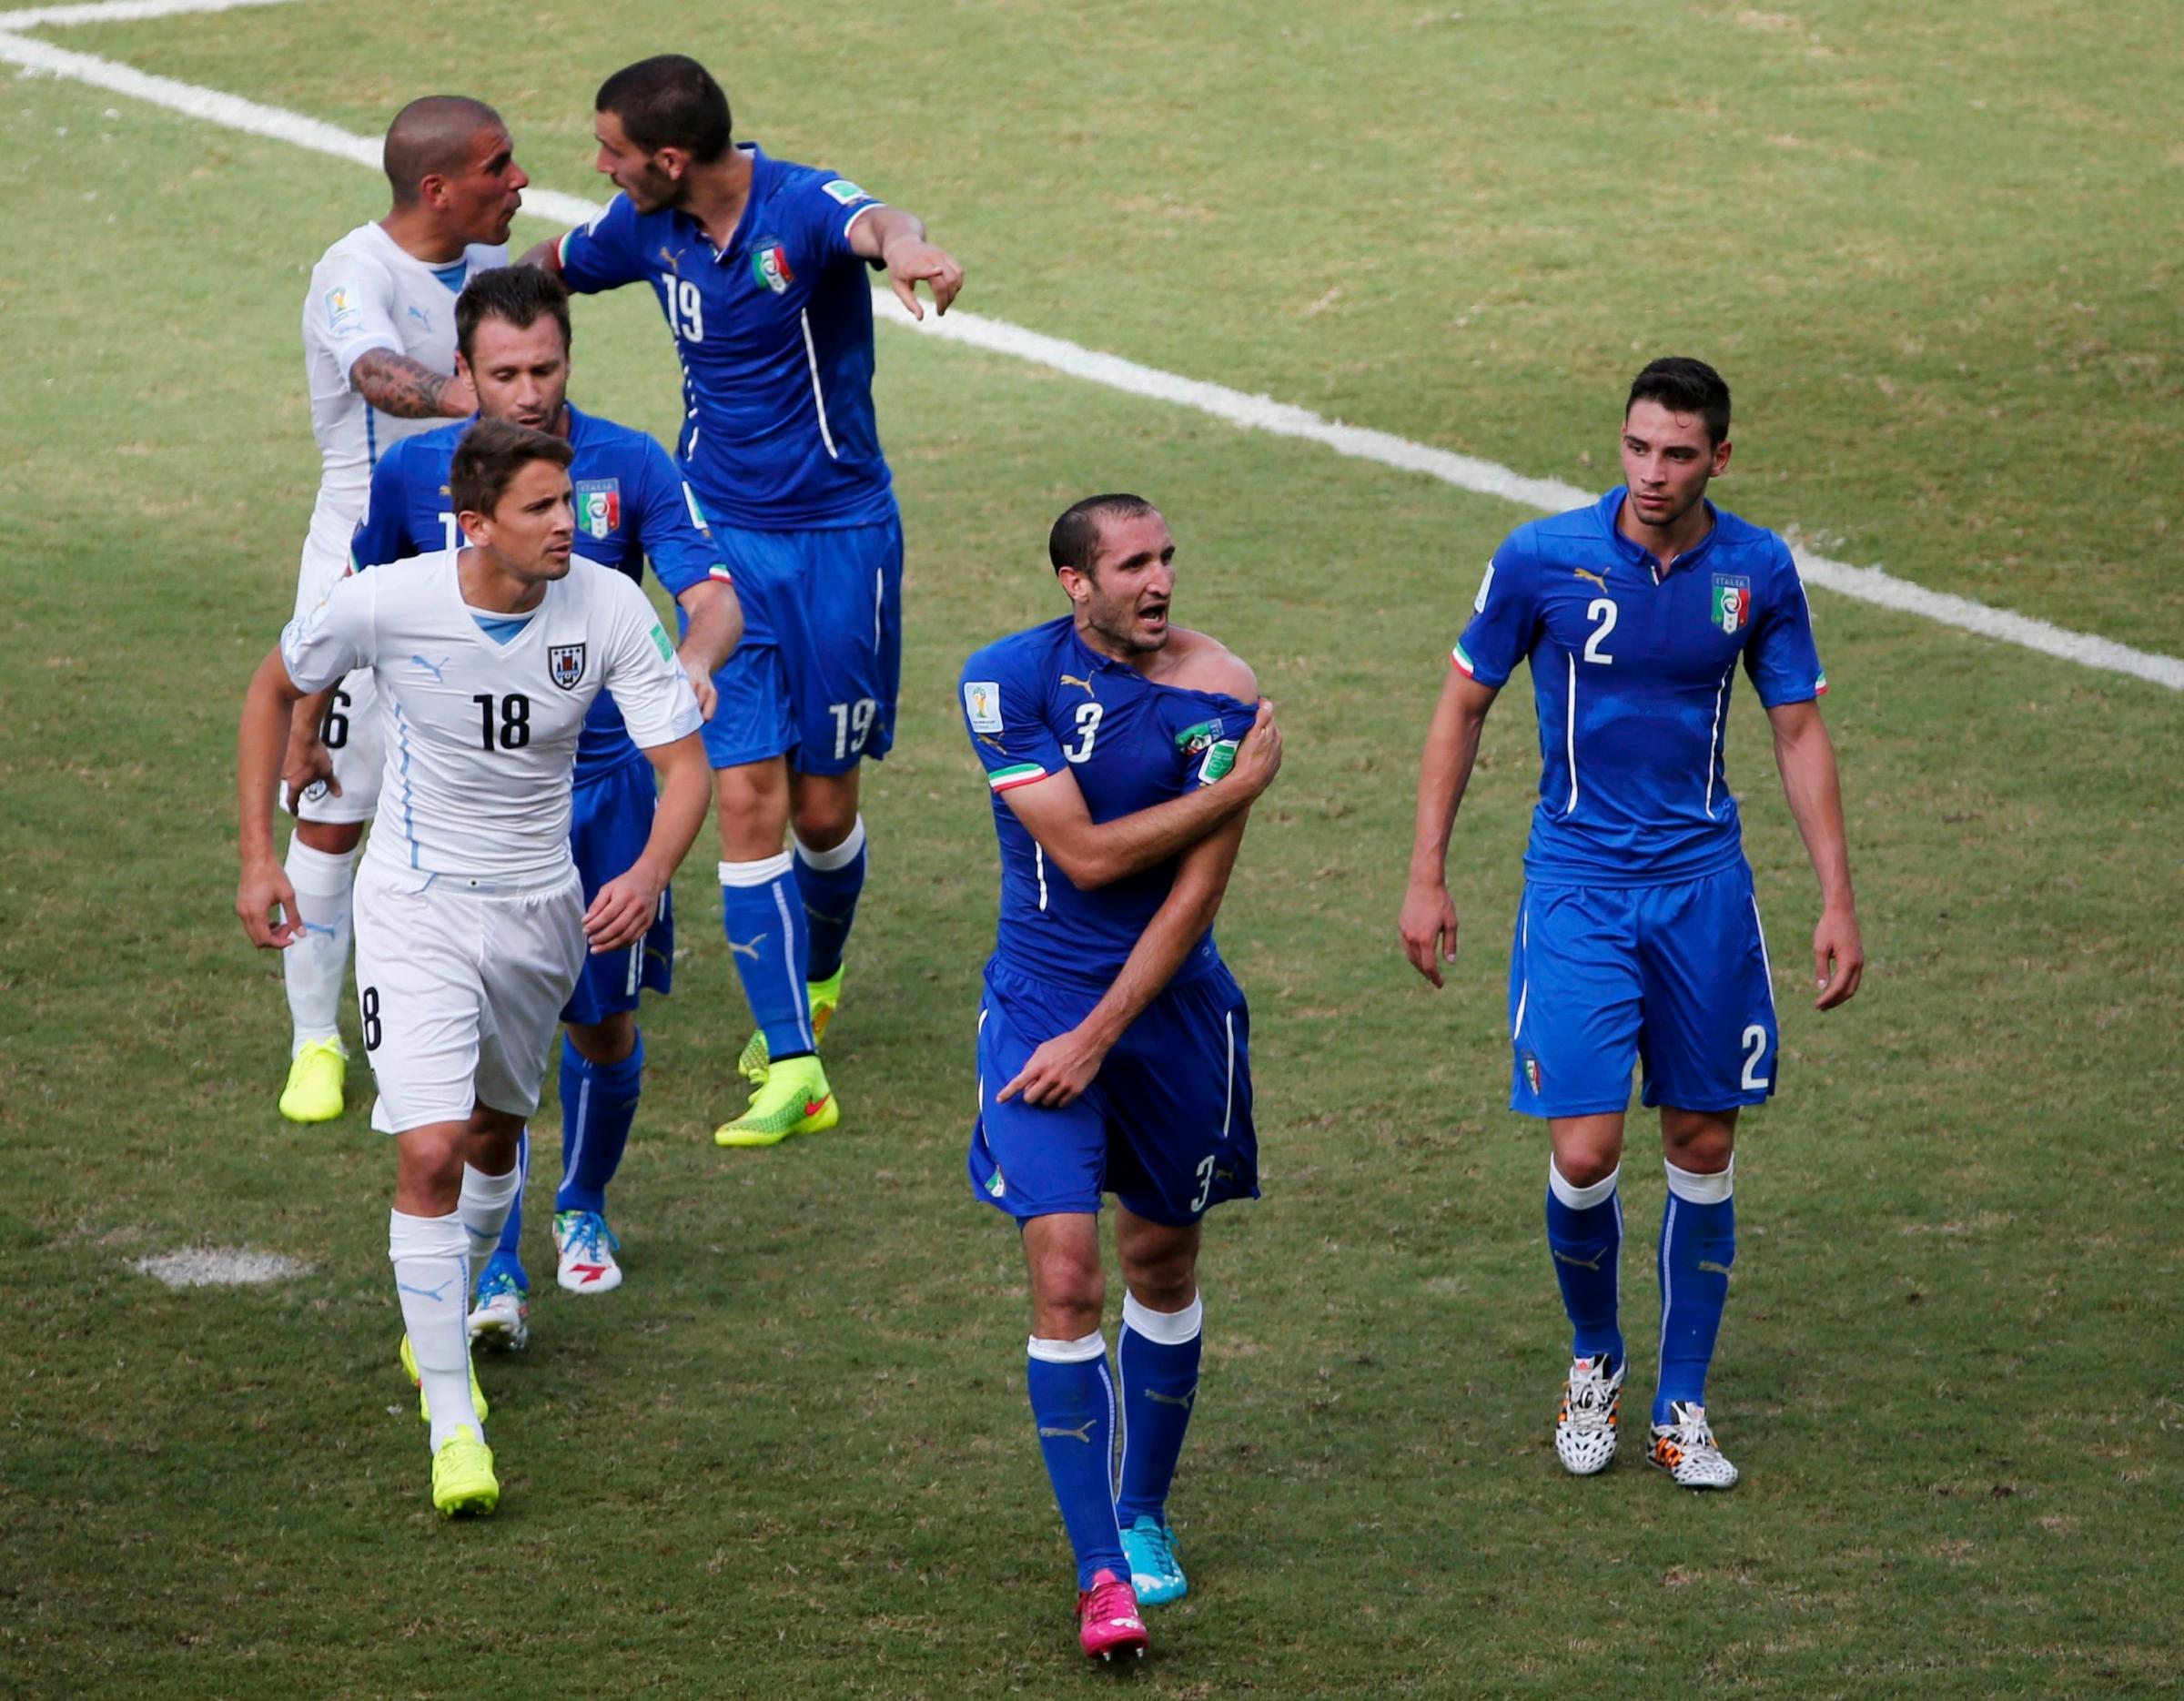 Italy's Giorgio Chiellini shows his shoulder, claiming he was bitten by Uruguay's Luis Suarez, during their 2014 World Cup Group D soccer match at the Dunas arena in Natal, Brazil on June 24, 2014.